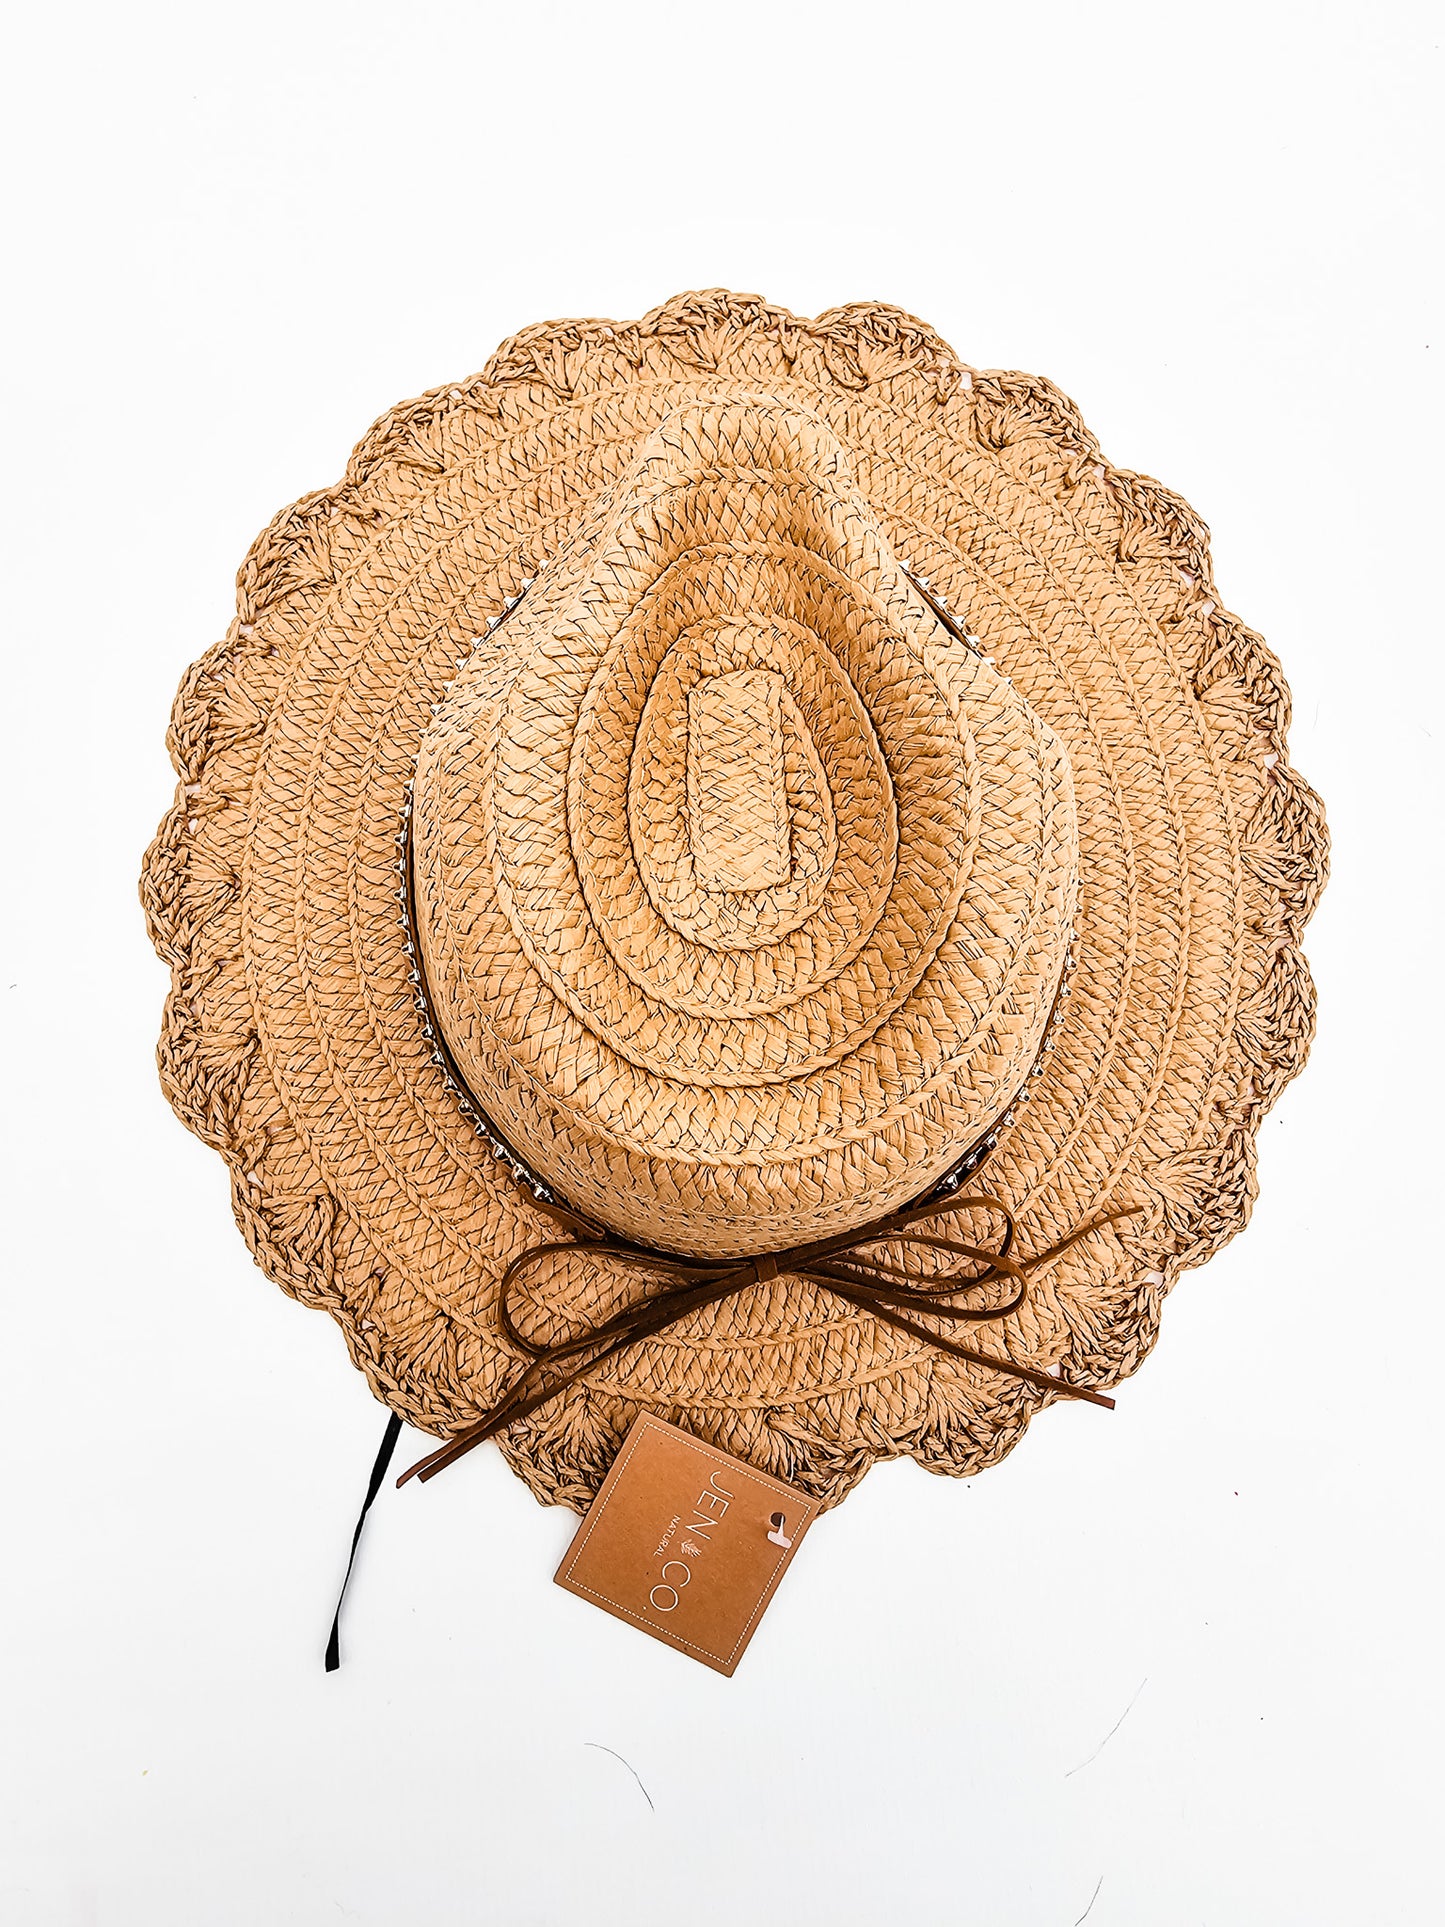 Straw Hat with Scalloped Brim